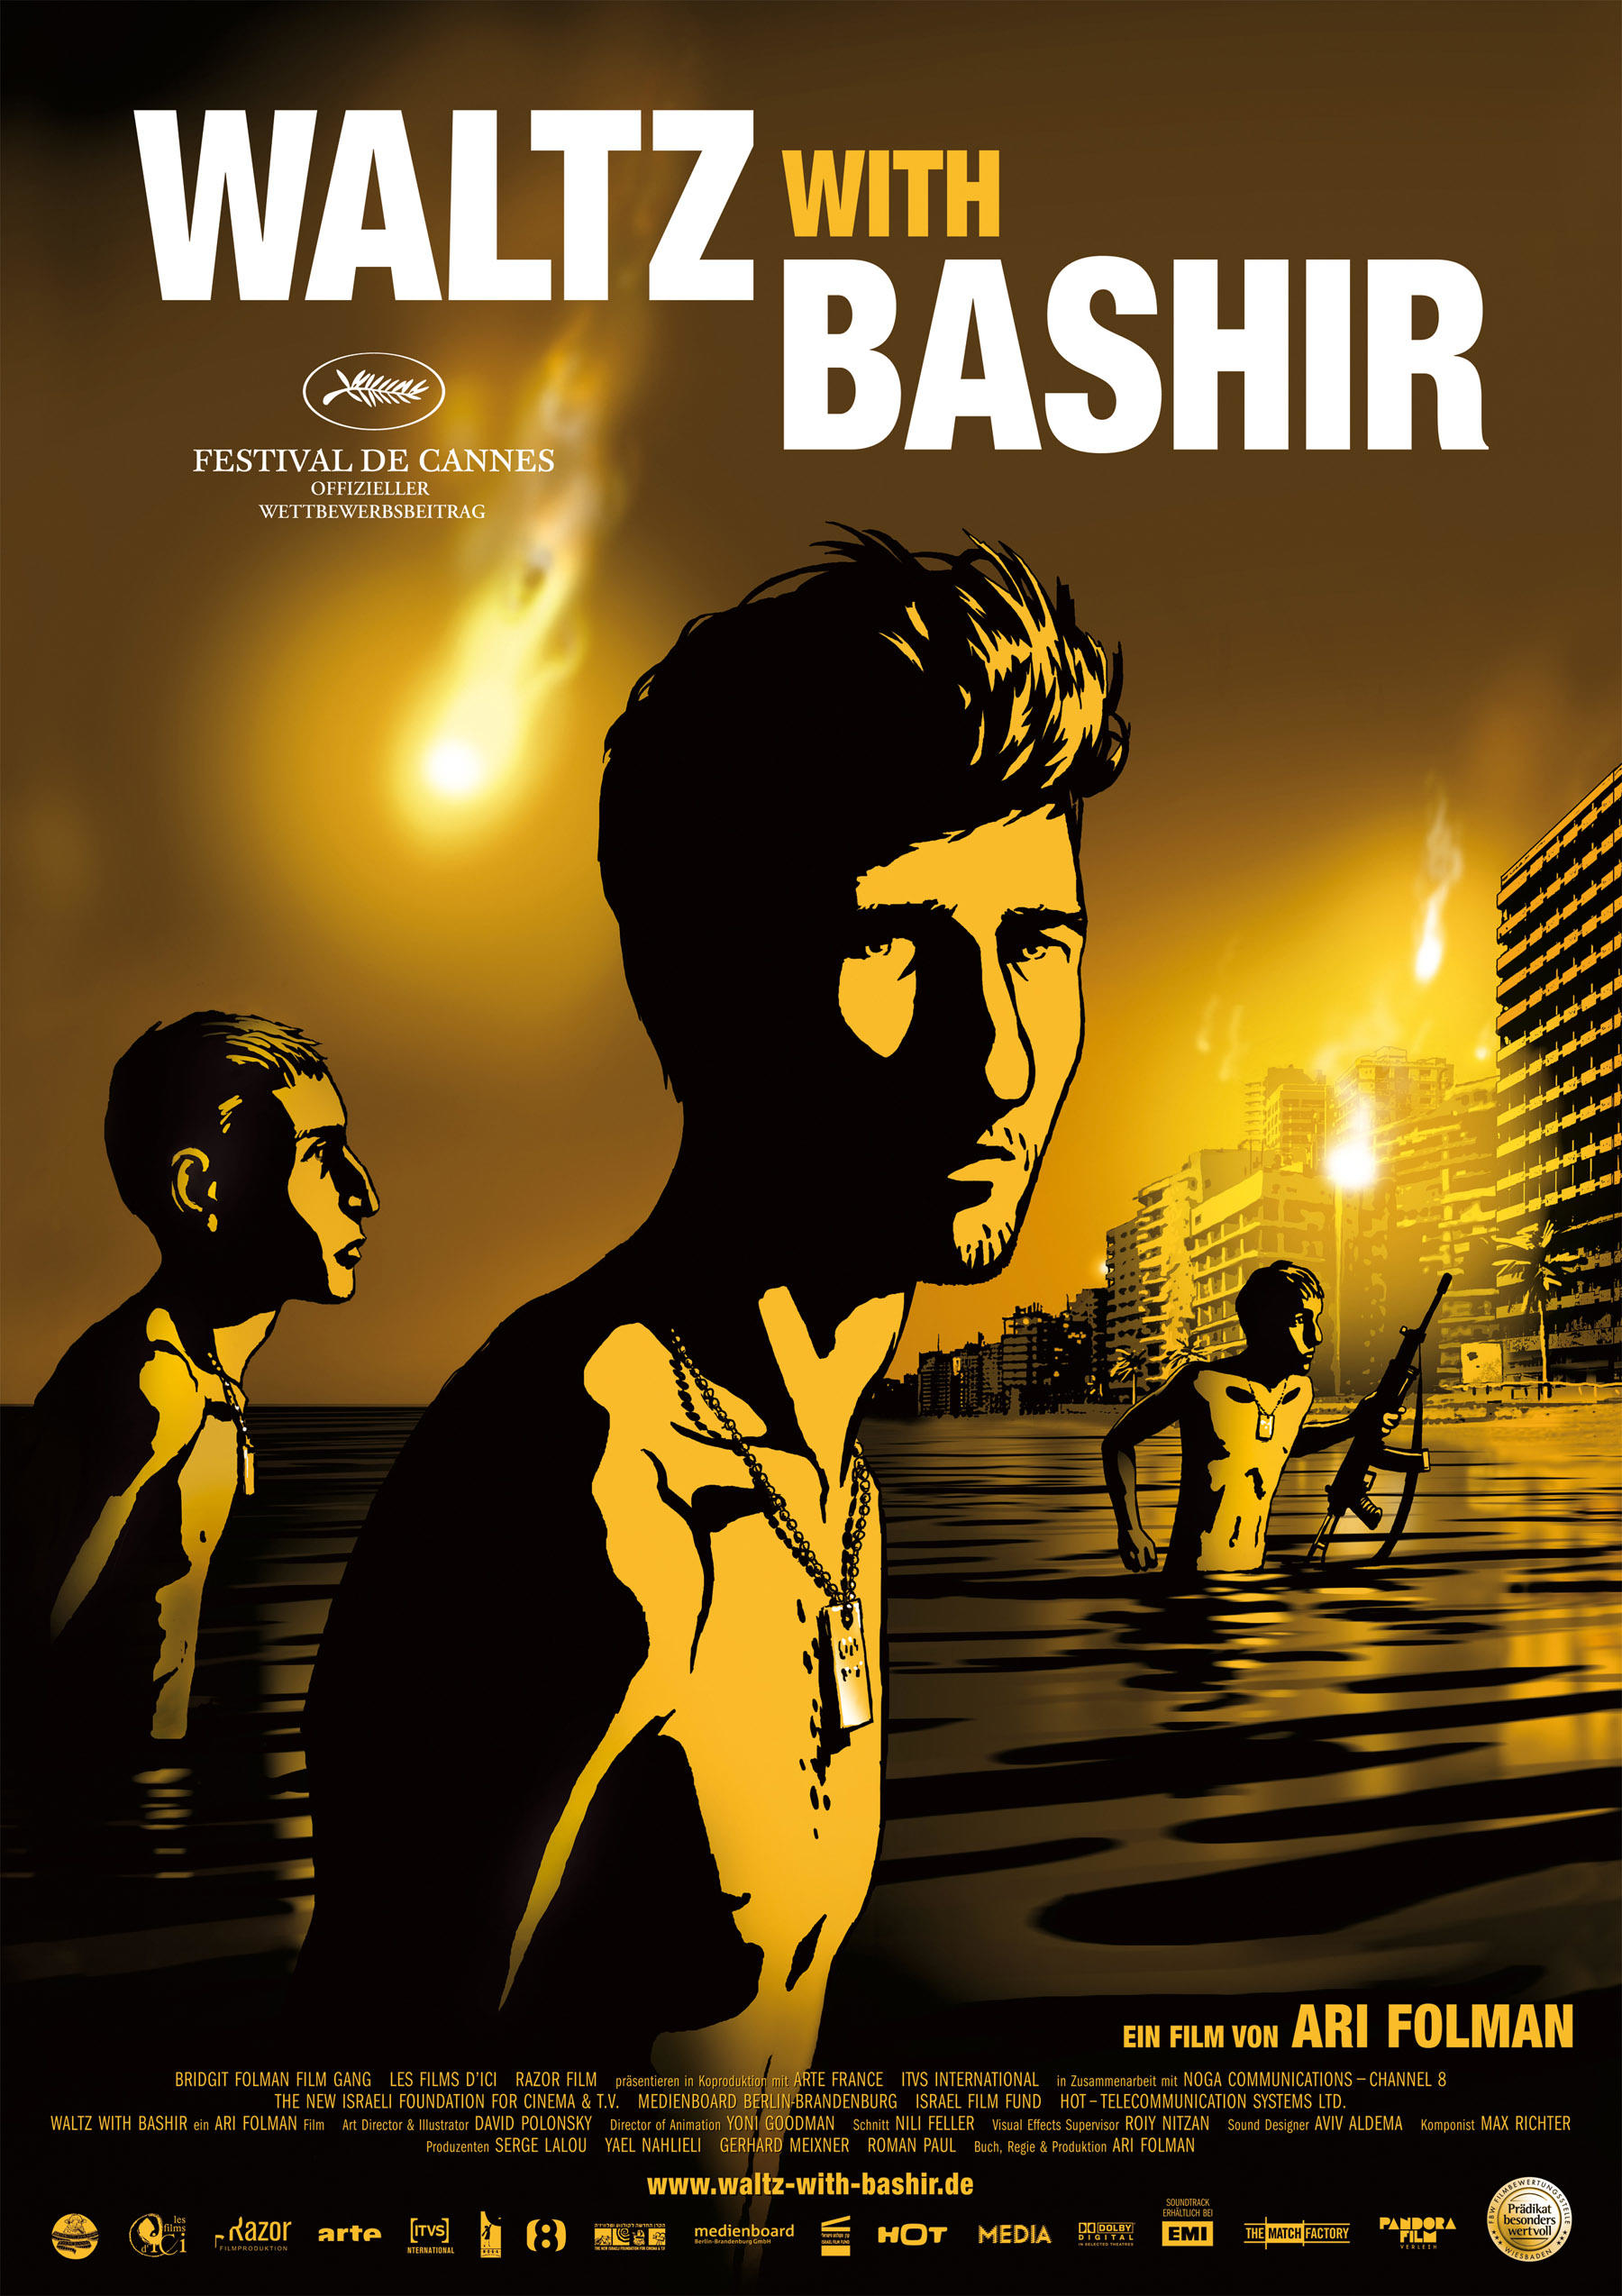 Poster image for the film Waltz with Bashir depicting topless male soldiers walking in the water toward a city on fire.